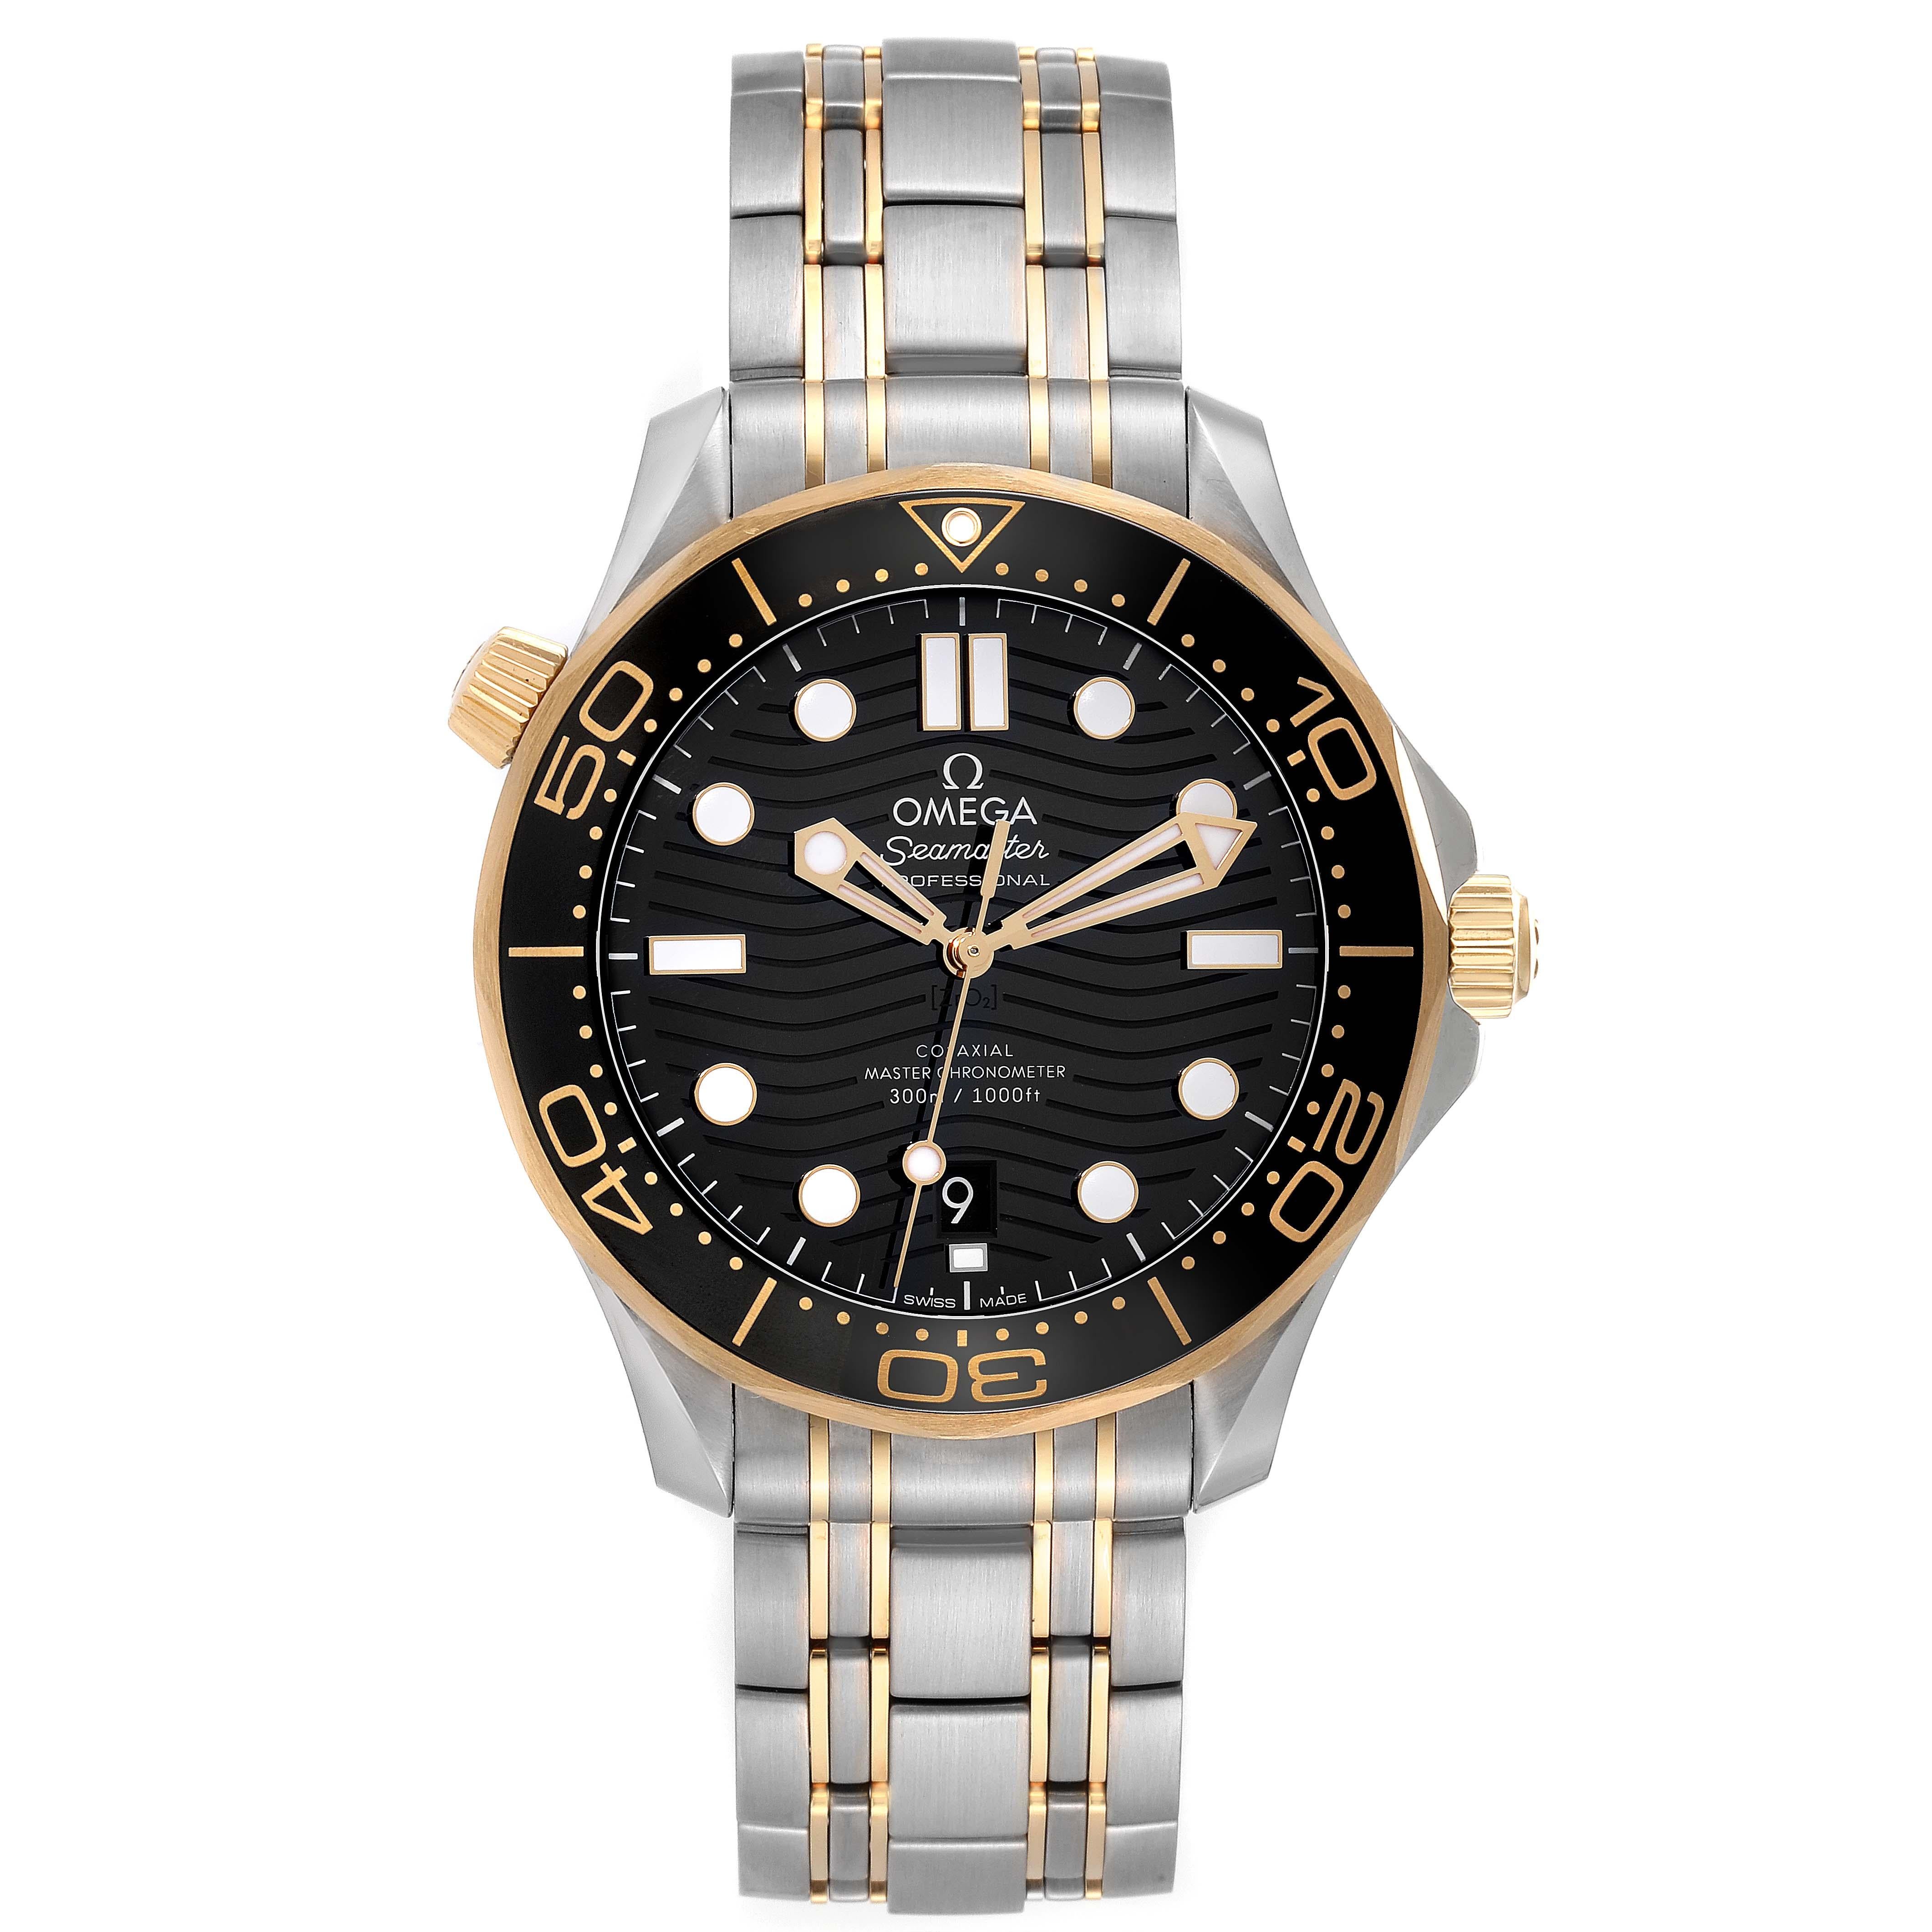 Omega Seamaster Steel Yellow Gold Mens Watch 210.20.42.20.01.002 Unworn. Automatic self-winding chronometer, Co-Axial Escapement movement. Certified Master Chronometer, approved by METAS, resistant to magnetic fields reaching 15,000 gauss. Free